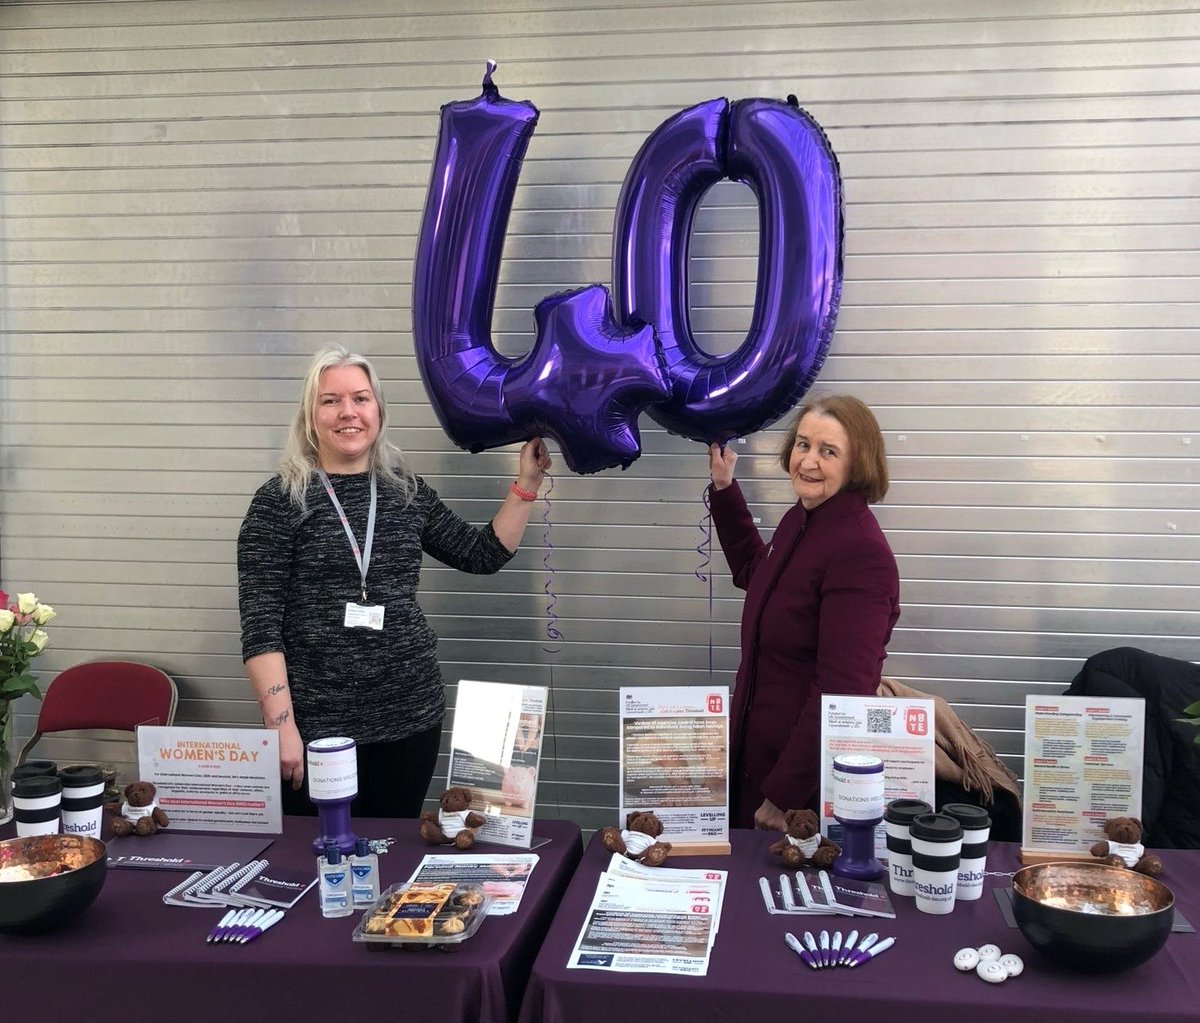 I’ve just visited the @ThresholdDAS stall in the St Elli Centre marking not only #InternationalWomensDay but also their 40th anniversary celebrations as a community organisation carrying out sterling work to tackle and prevent domestic abuse. Well done to everyone involved!